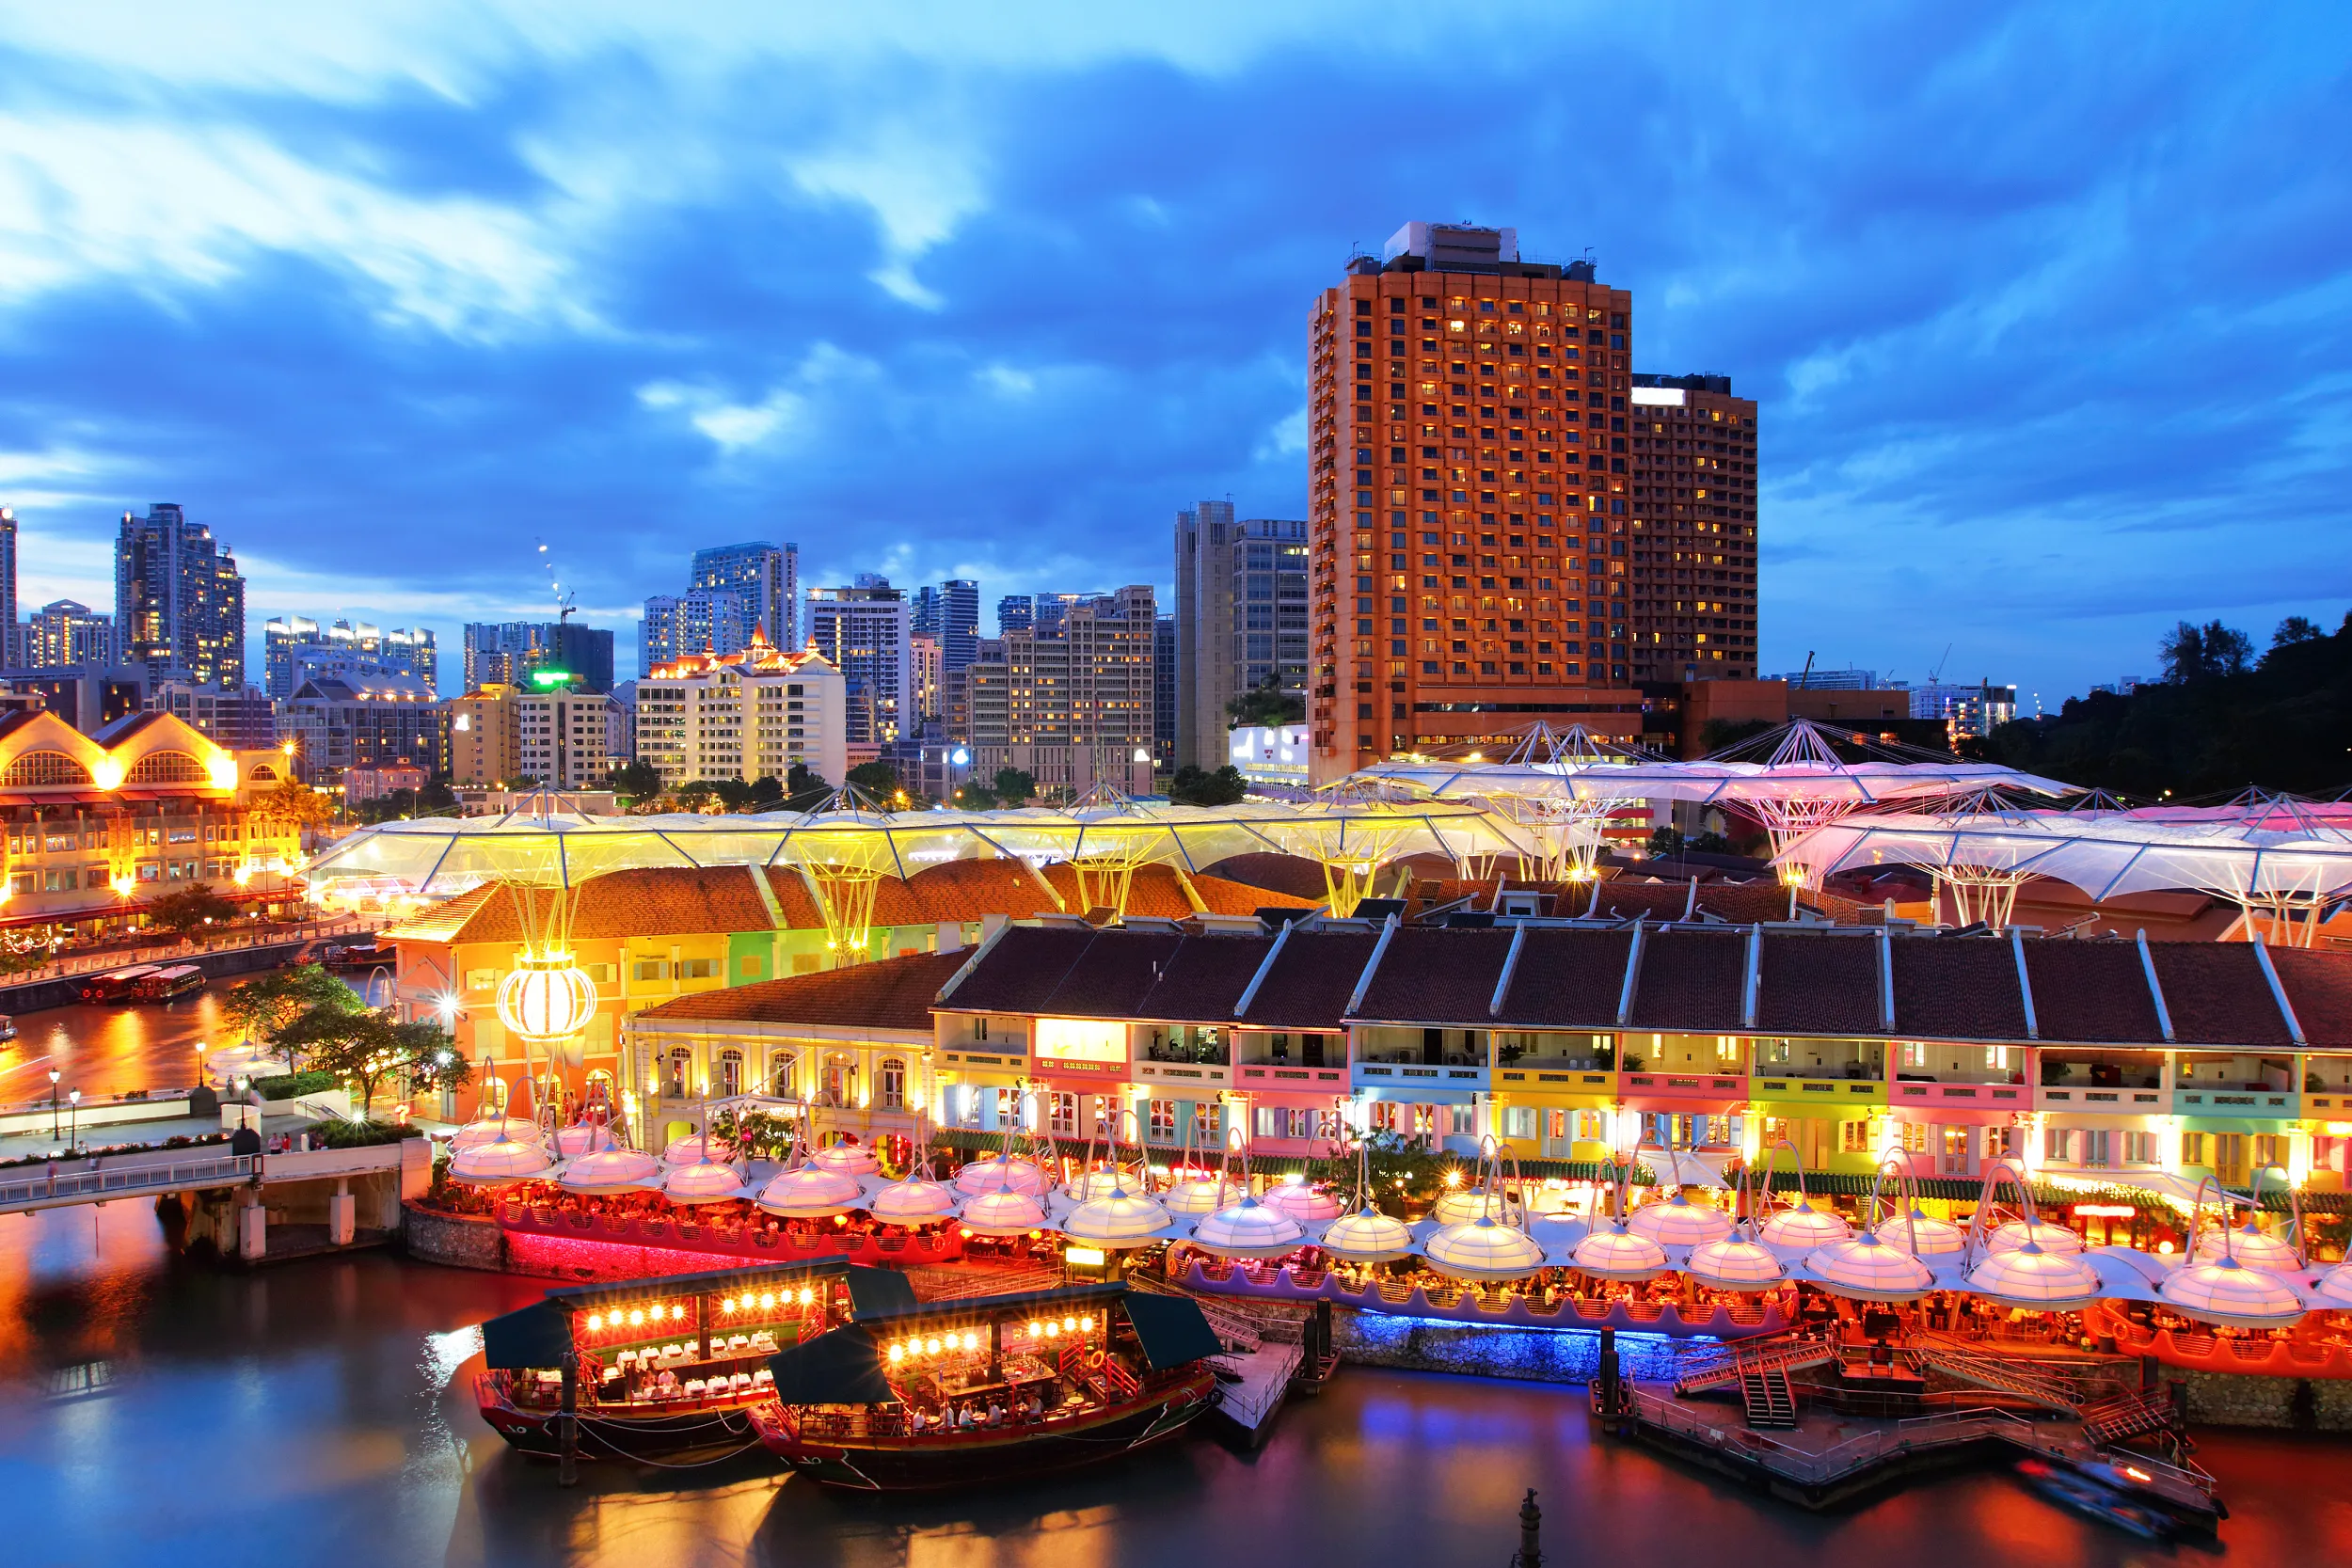 Clarke Quay in Singapore, central_asia | Sporting Equipment,Handbags,Shoes,Clothes,Home Decor,Natural Beauty Products,Cosmetics,Sportswear - Country Helper